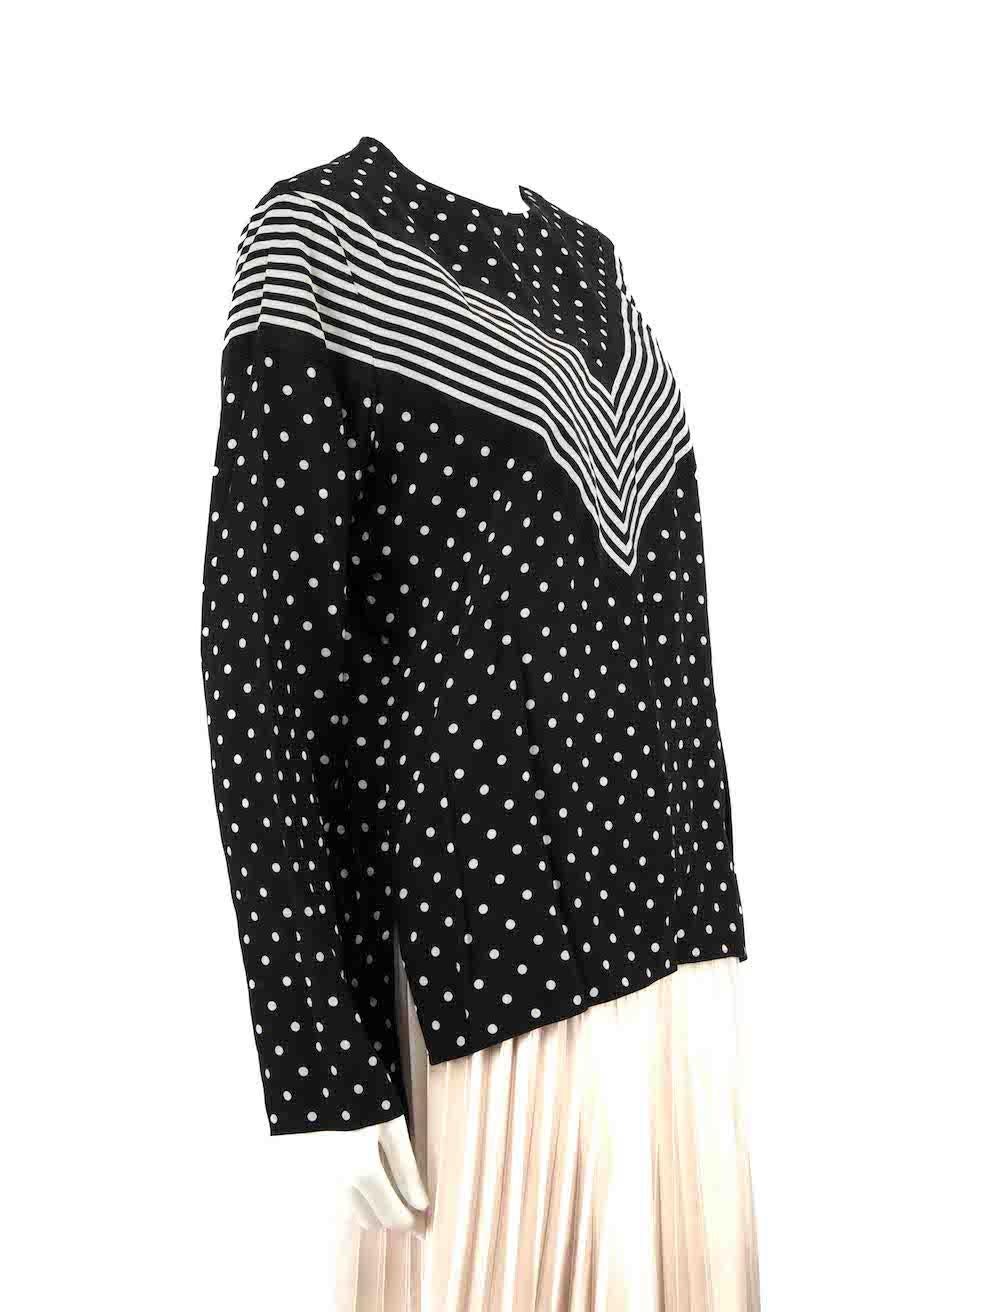 CONDITION is Very good. Minimal wear to dress is evident. Minimal wear to the left underarm with slight discolouration on this used Stella McCartney designer resale item.
 
Details
Black
Silk
Long sleeves blouse
Polkadot and striped pattern
Round